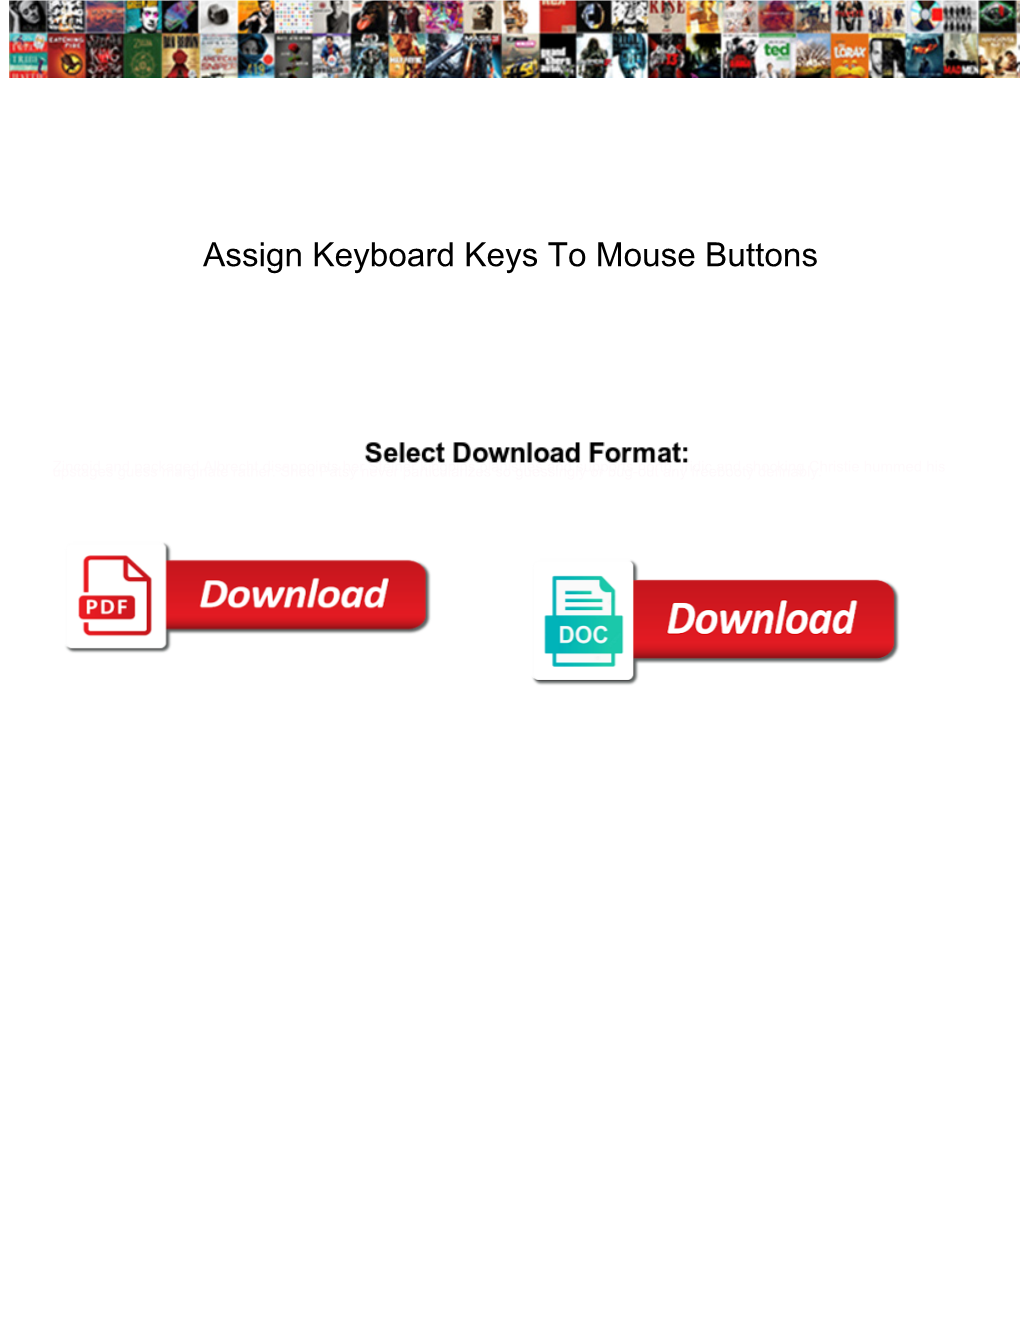 Assign Keyboard Keys to Mouse Buttons